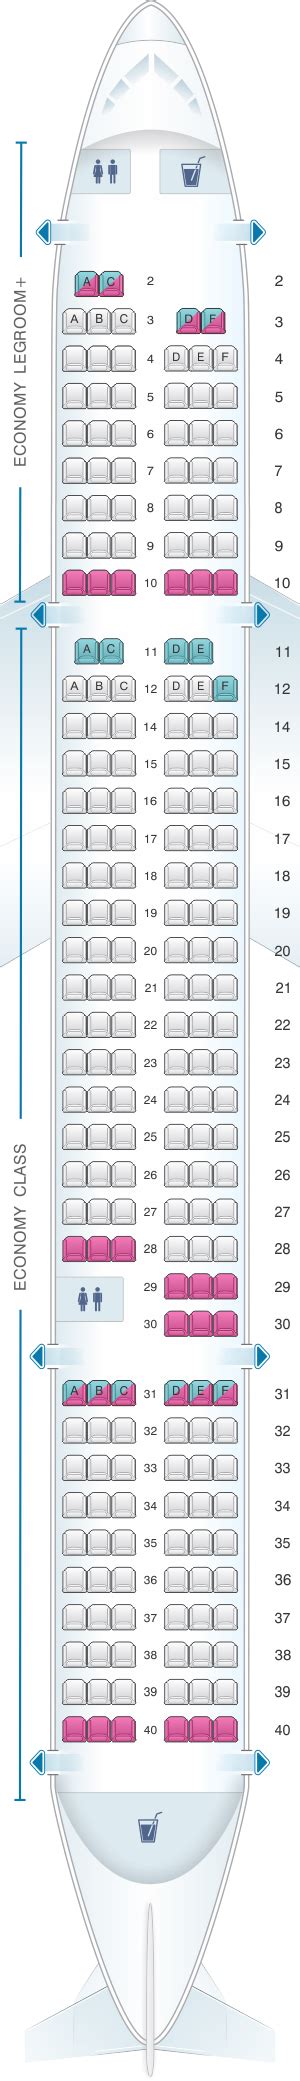 Seat map of the Airbus A320 (320) All 177 seats of the airplane are the seats of economy class. This aircraft offers 18 seats that are designated as legroom + seats. These are the seats 1DEF, 2ABC and the seats of the 12th and 14th row. To reserve these seats an additional fee must be paid.. 